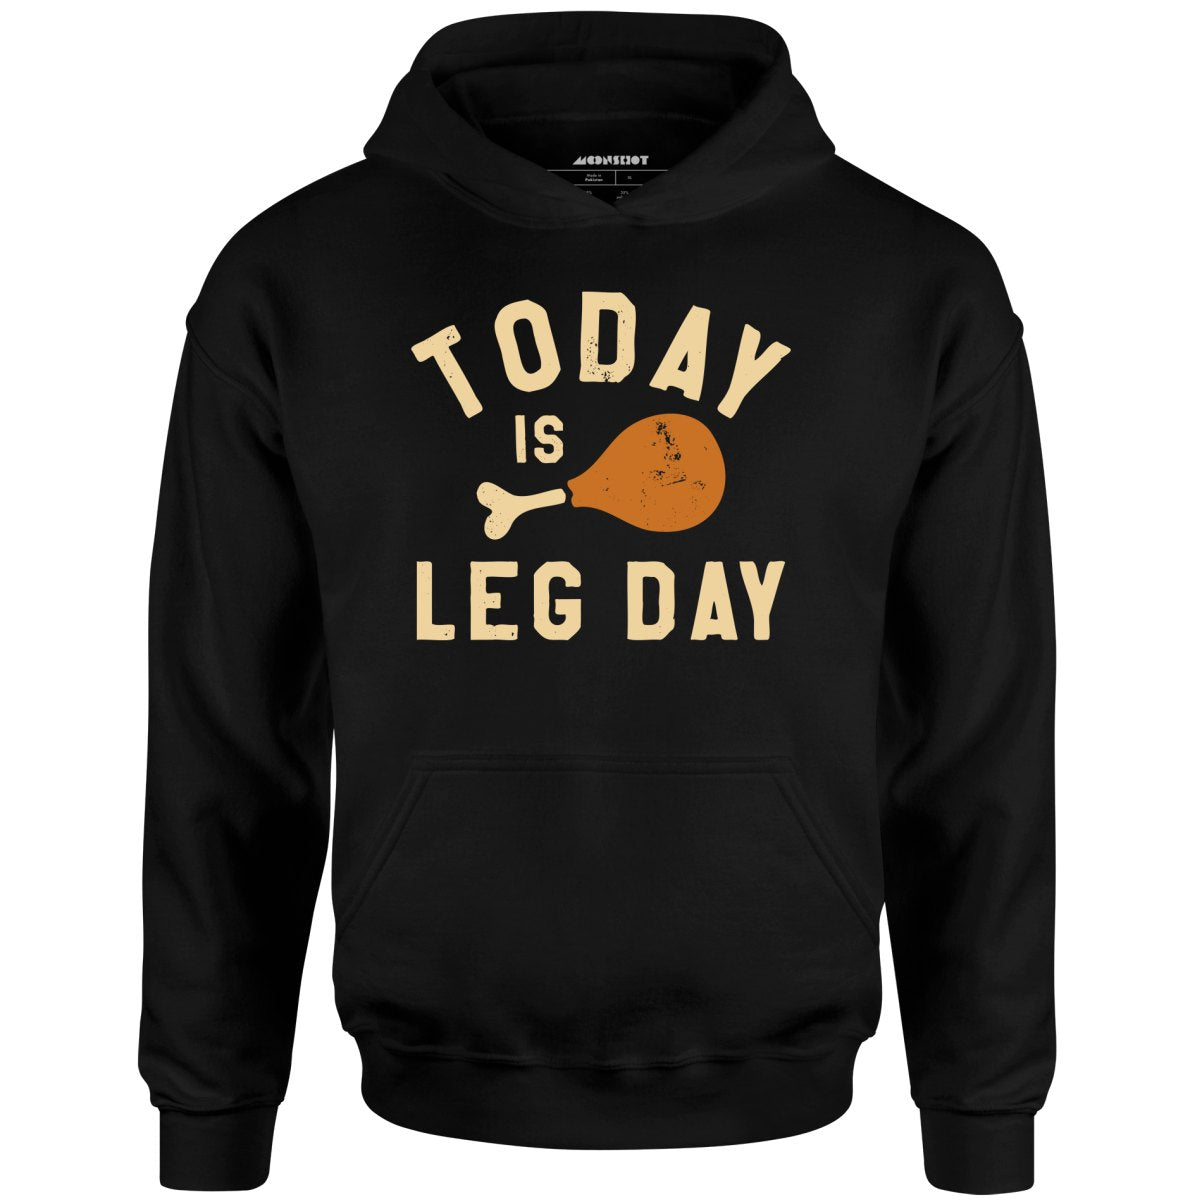 Today is Leg Day - Unisex Hoodie